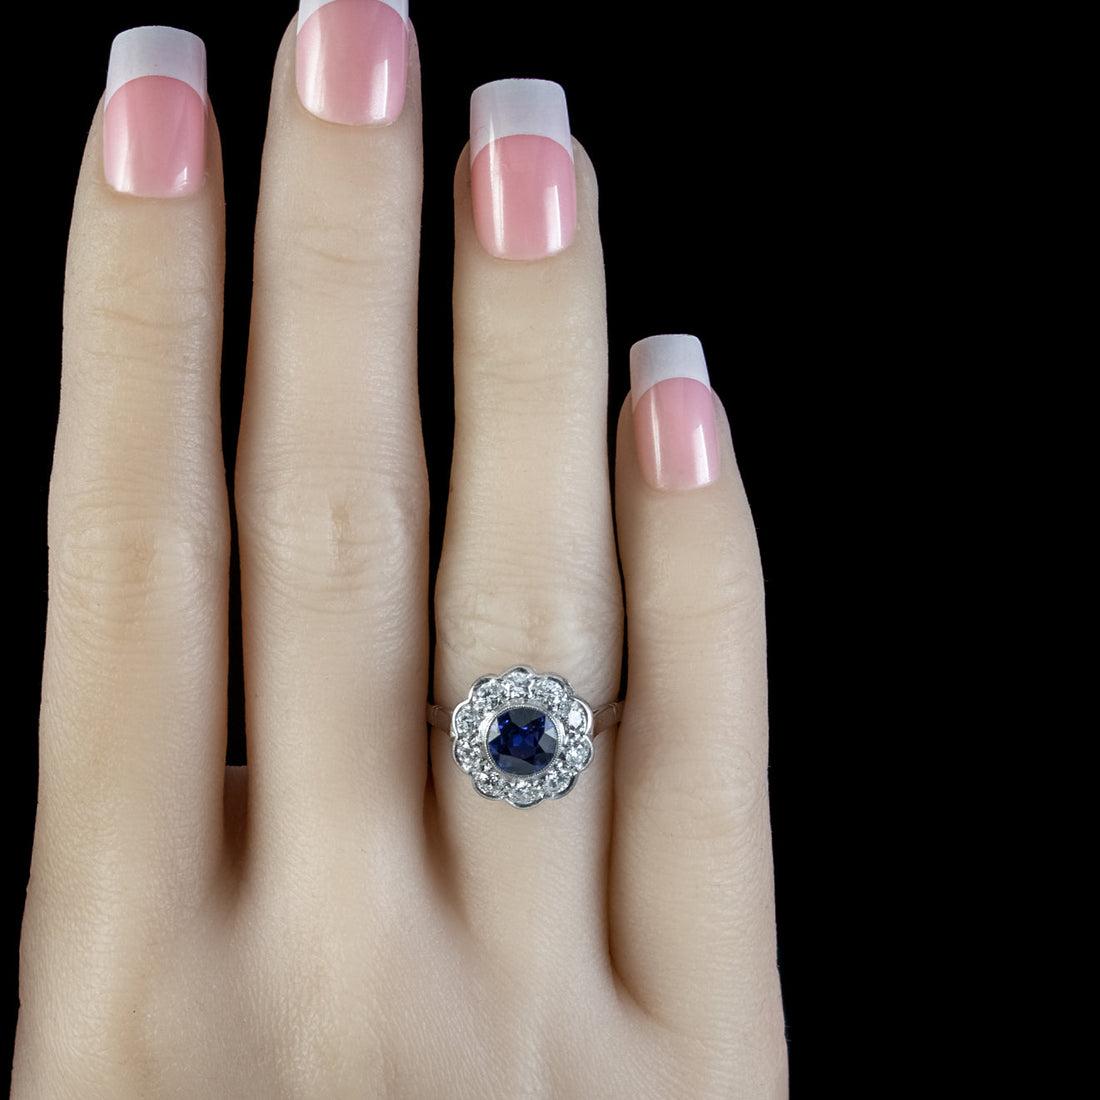 Women's Antique Edwardian Sapphire Diamond Cluster Ring in 1.25ct Sapphire, circa 1910 For Sale